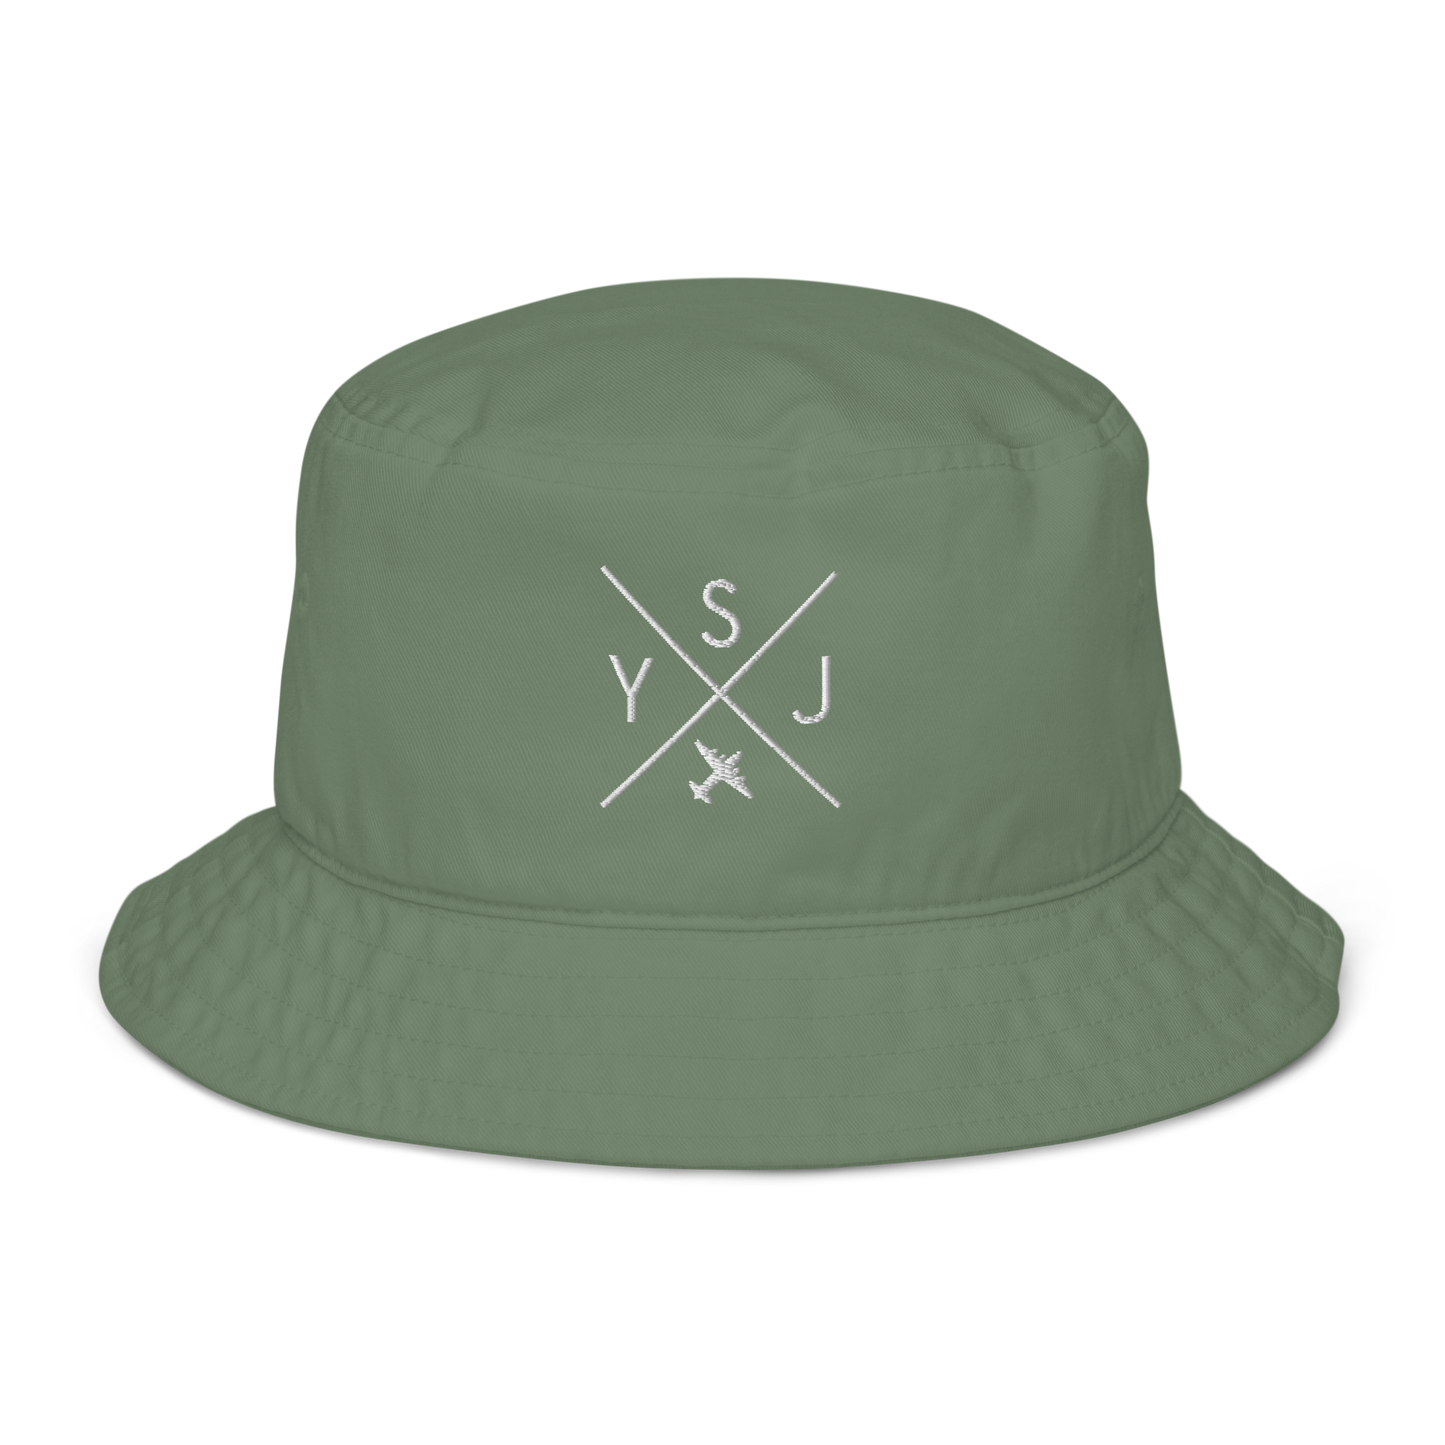 YHM Designs - YSJ Saint John Organic Cotton Bucket Hat - Crossed-X Design with Airport Code and Vintage Propliner - White Embroidery - Image 06